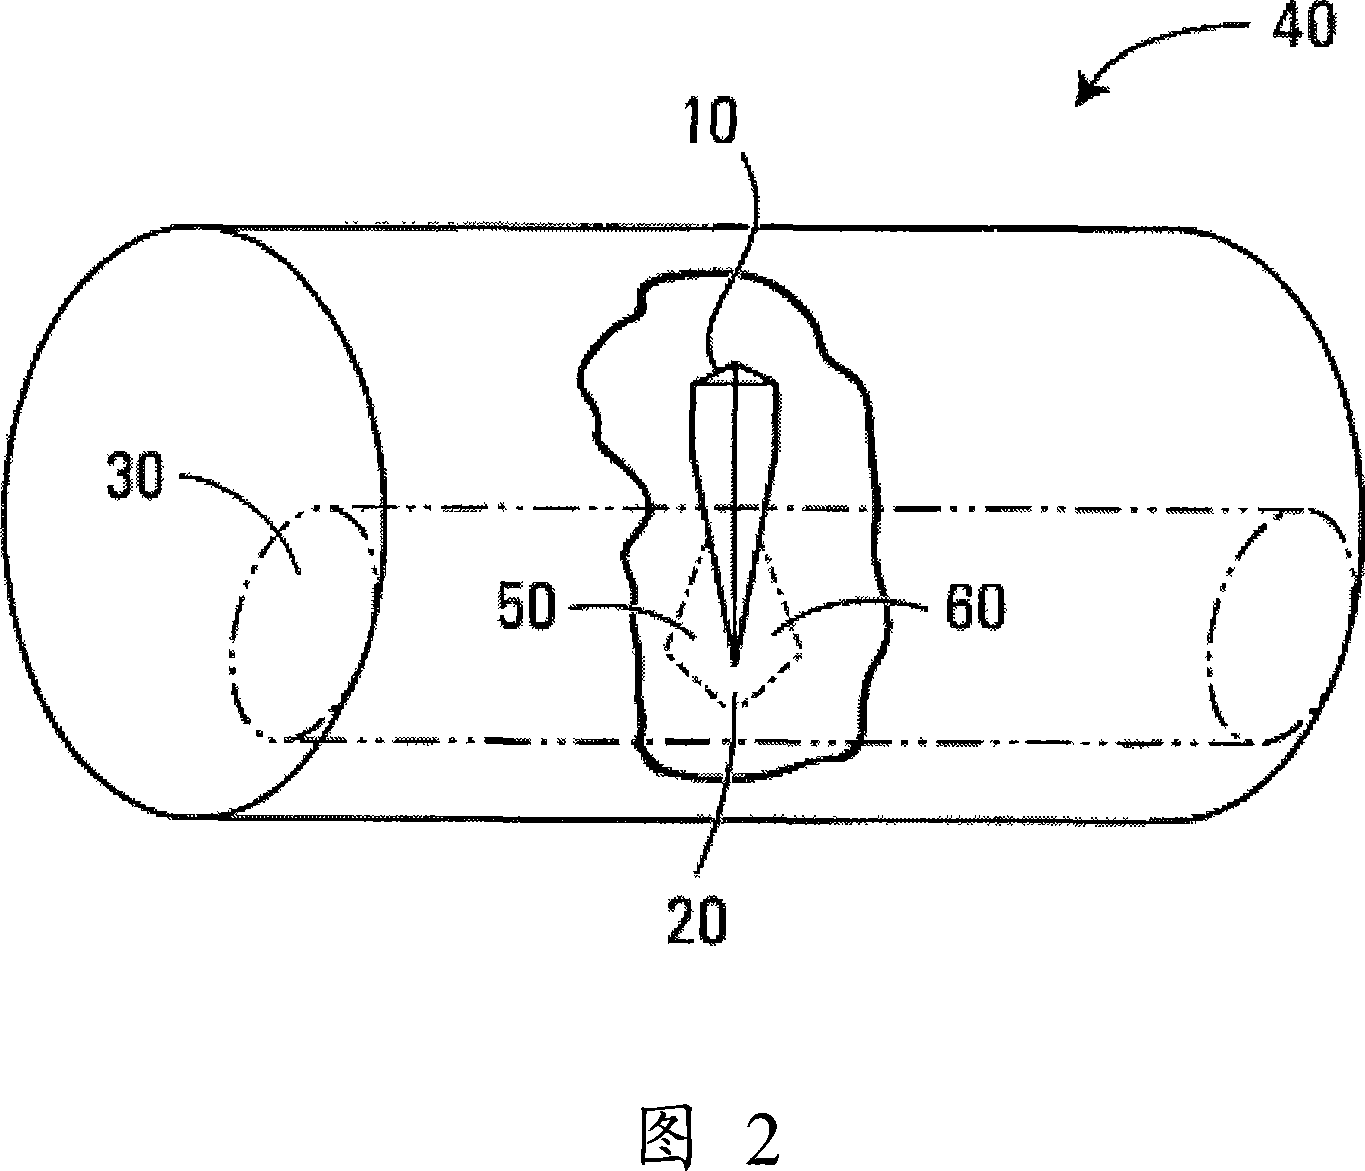 Process and apparatus for coating a controlled release product in a rotating drum